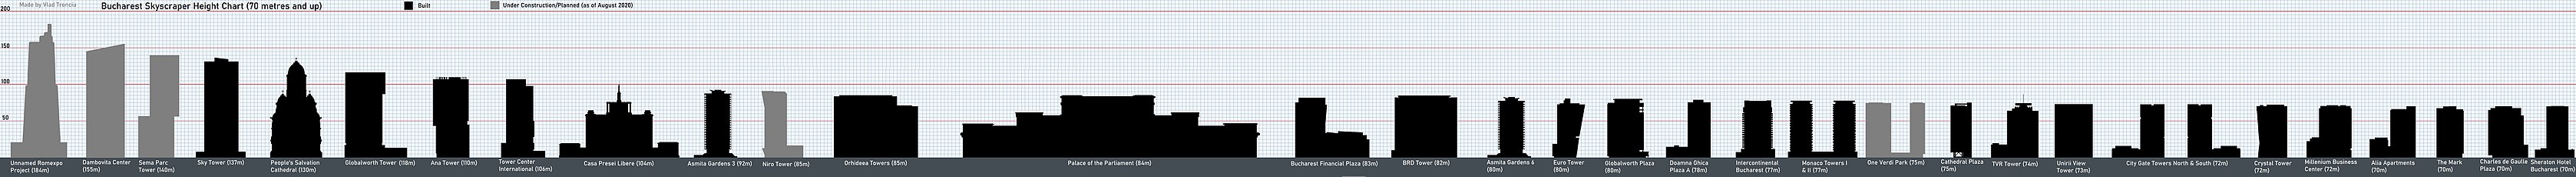 List of the tallest buildings in Bucharest, taller than 70 metres, under construction or finished.